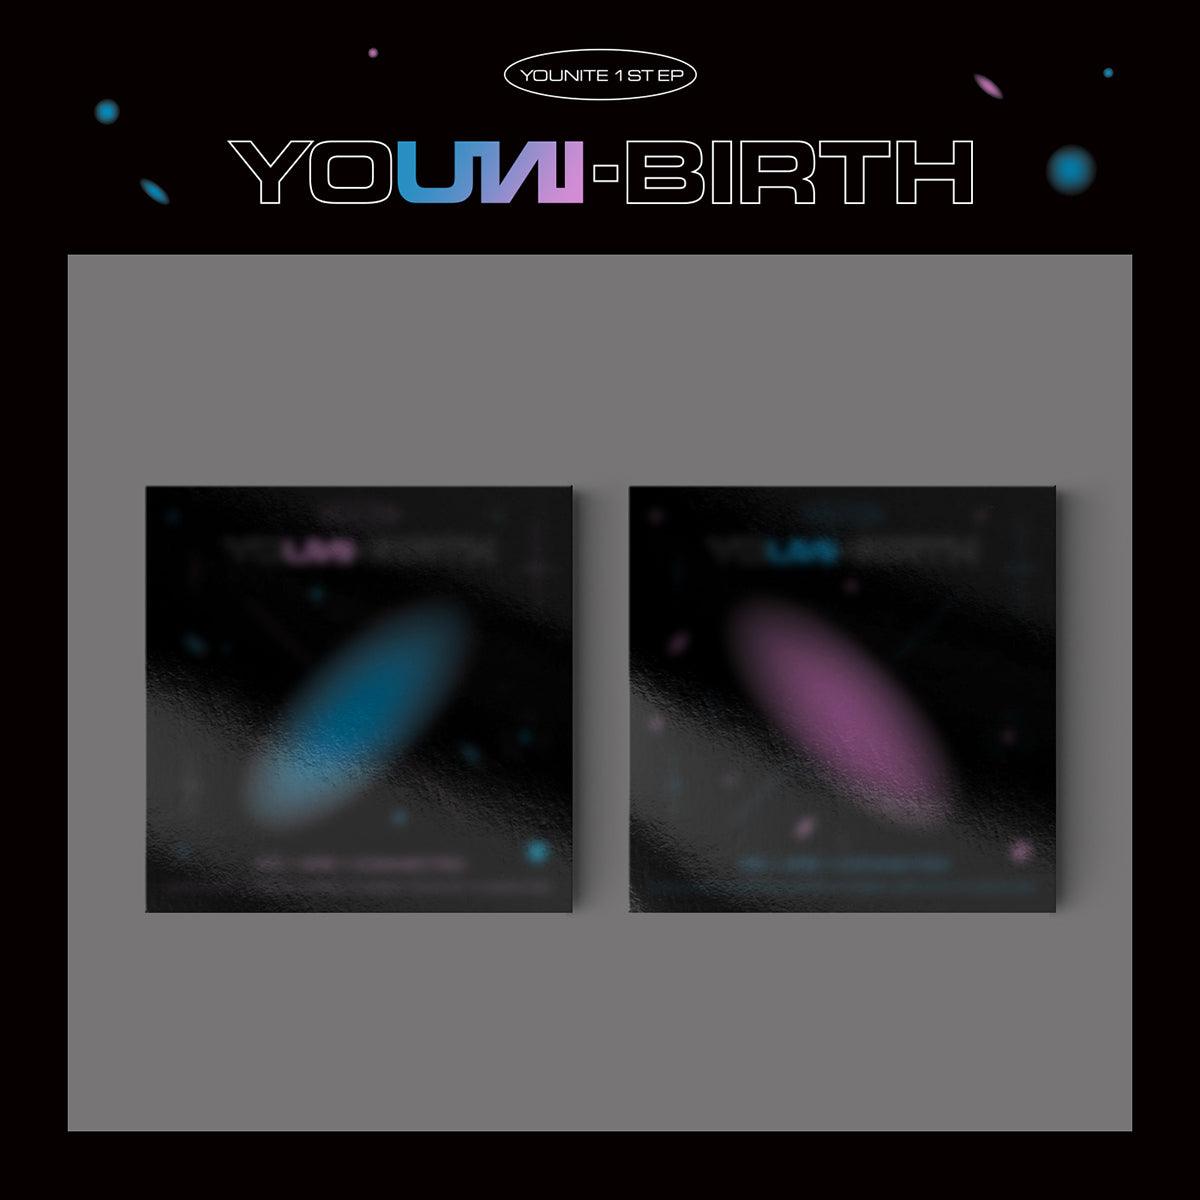 YOUNITE - 1st EP [YOUNI-BIRTH] - KAVE SQUARE